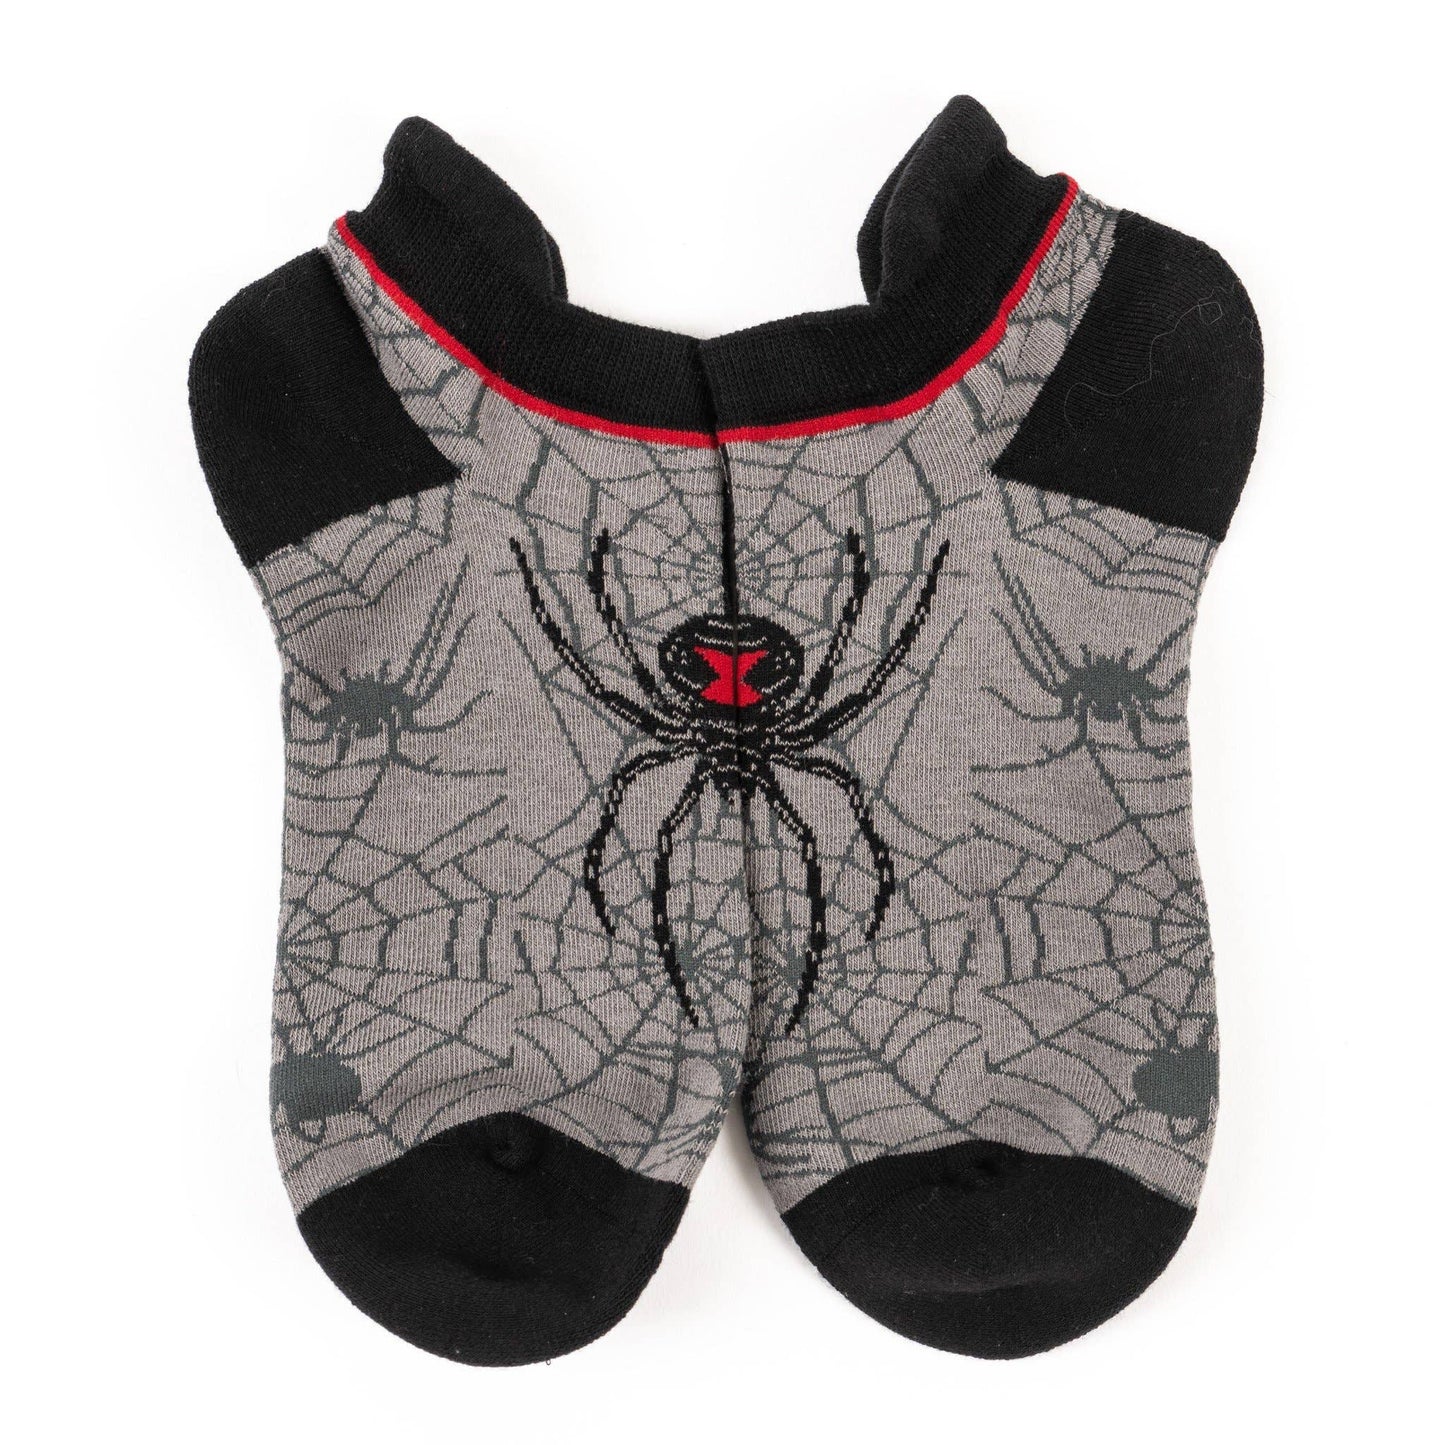 Foot Clothes Black Widow Spider Ankle Socks